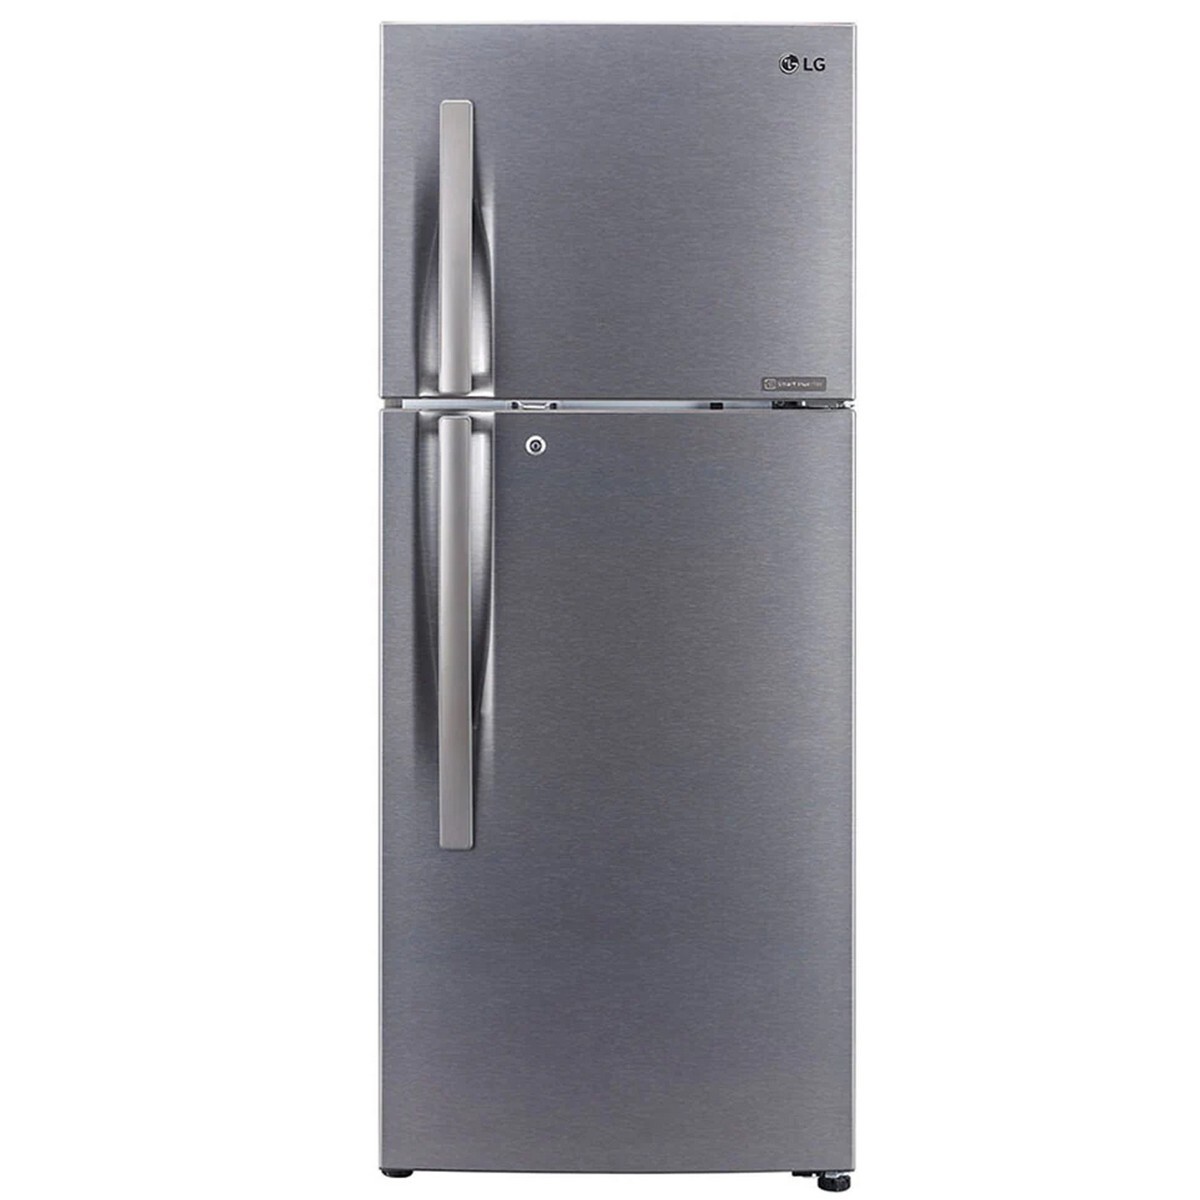 LG Frost Free Double Door Refrigerator GL-S292RDSY 260 Ltr